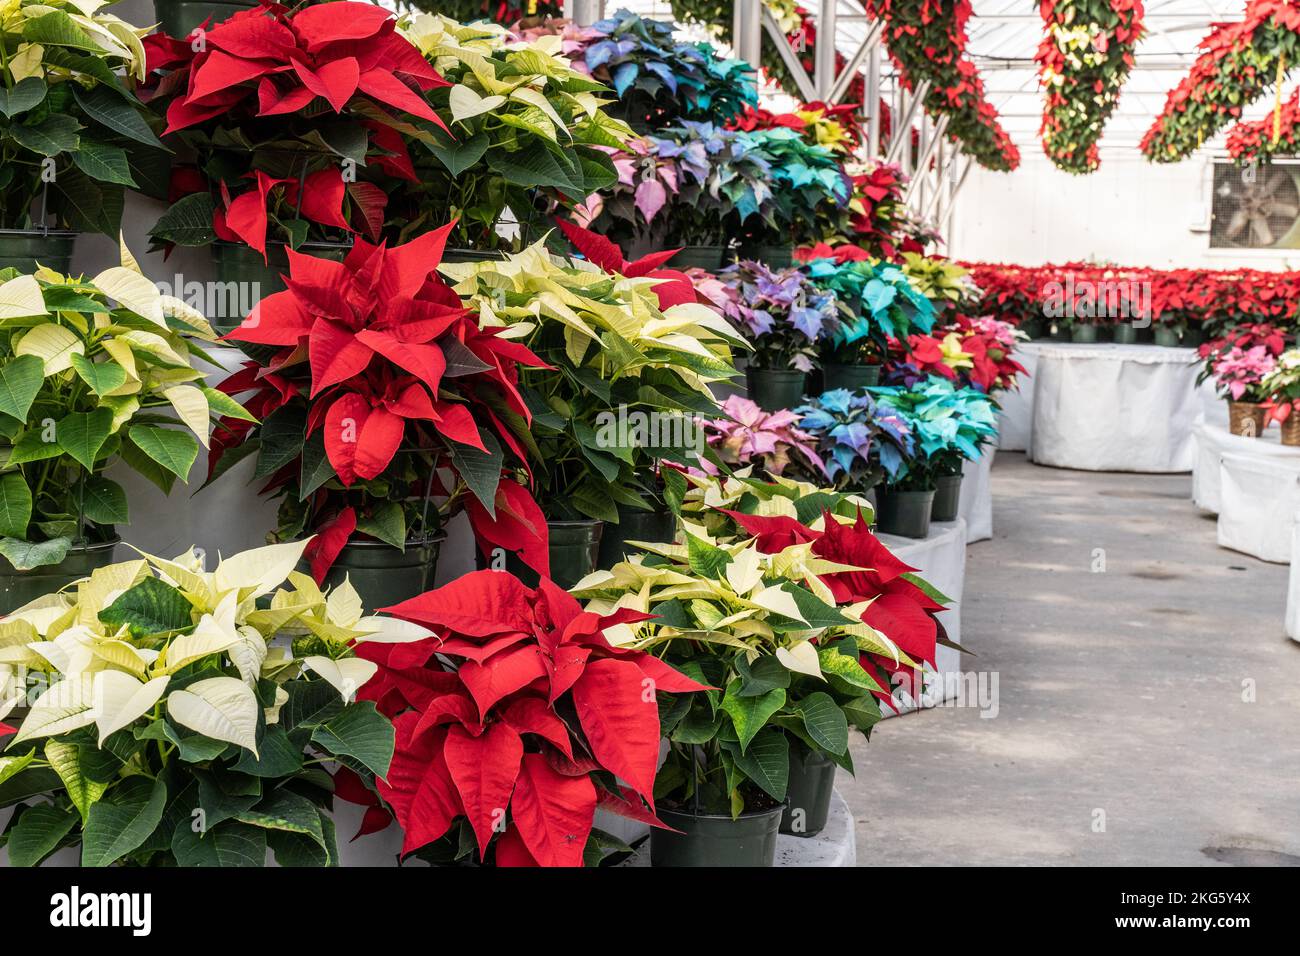 Colorful poinsettias on display in greenhouse blooming in time for the Christmas holiday season. Stock Photo